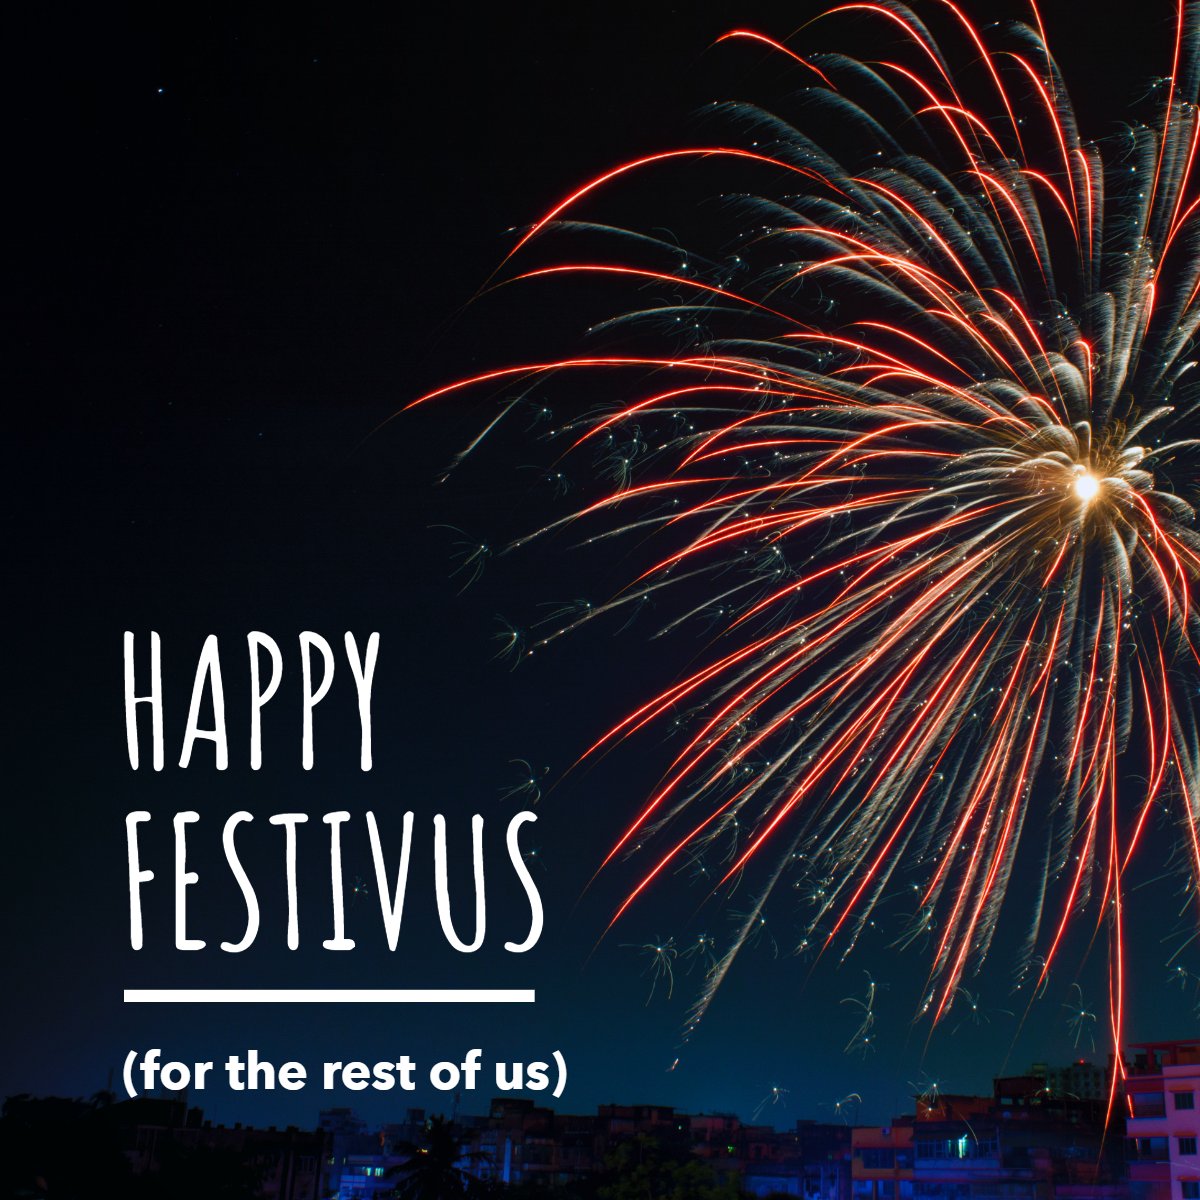 “A Festivus for the rest of us!”🎆🎇

#happyfestivus #festivus #holidayseason #happyholidays #holidaytime 
 #TheFryGroup #IknowRealEstate #TwinCitiesRealEstate #LocalExpert